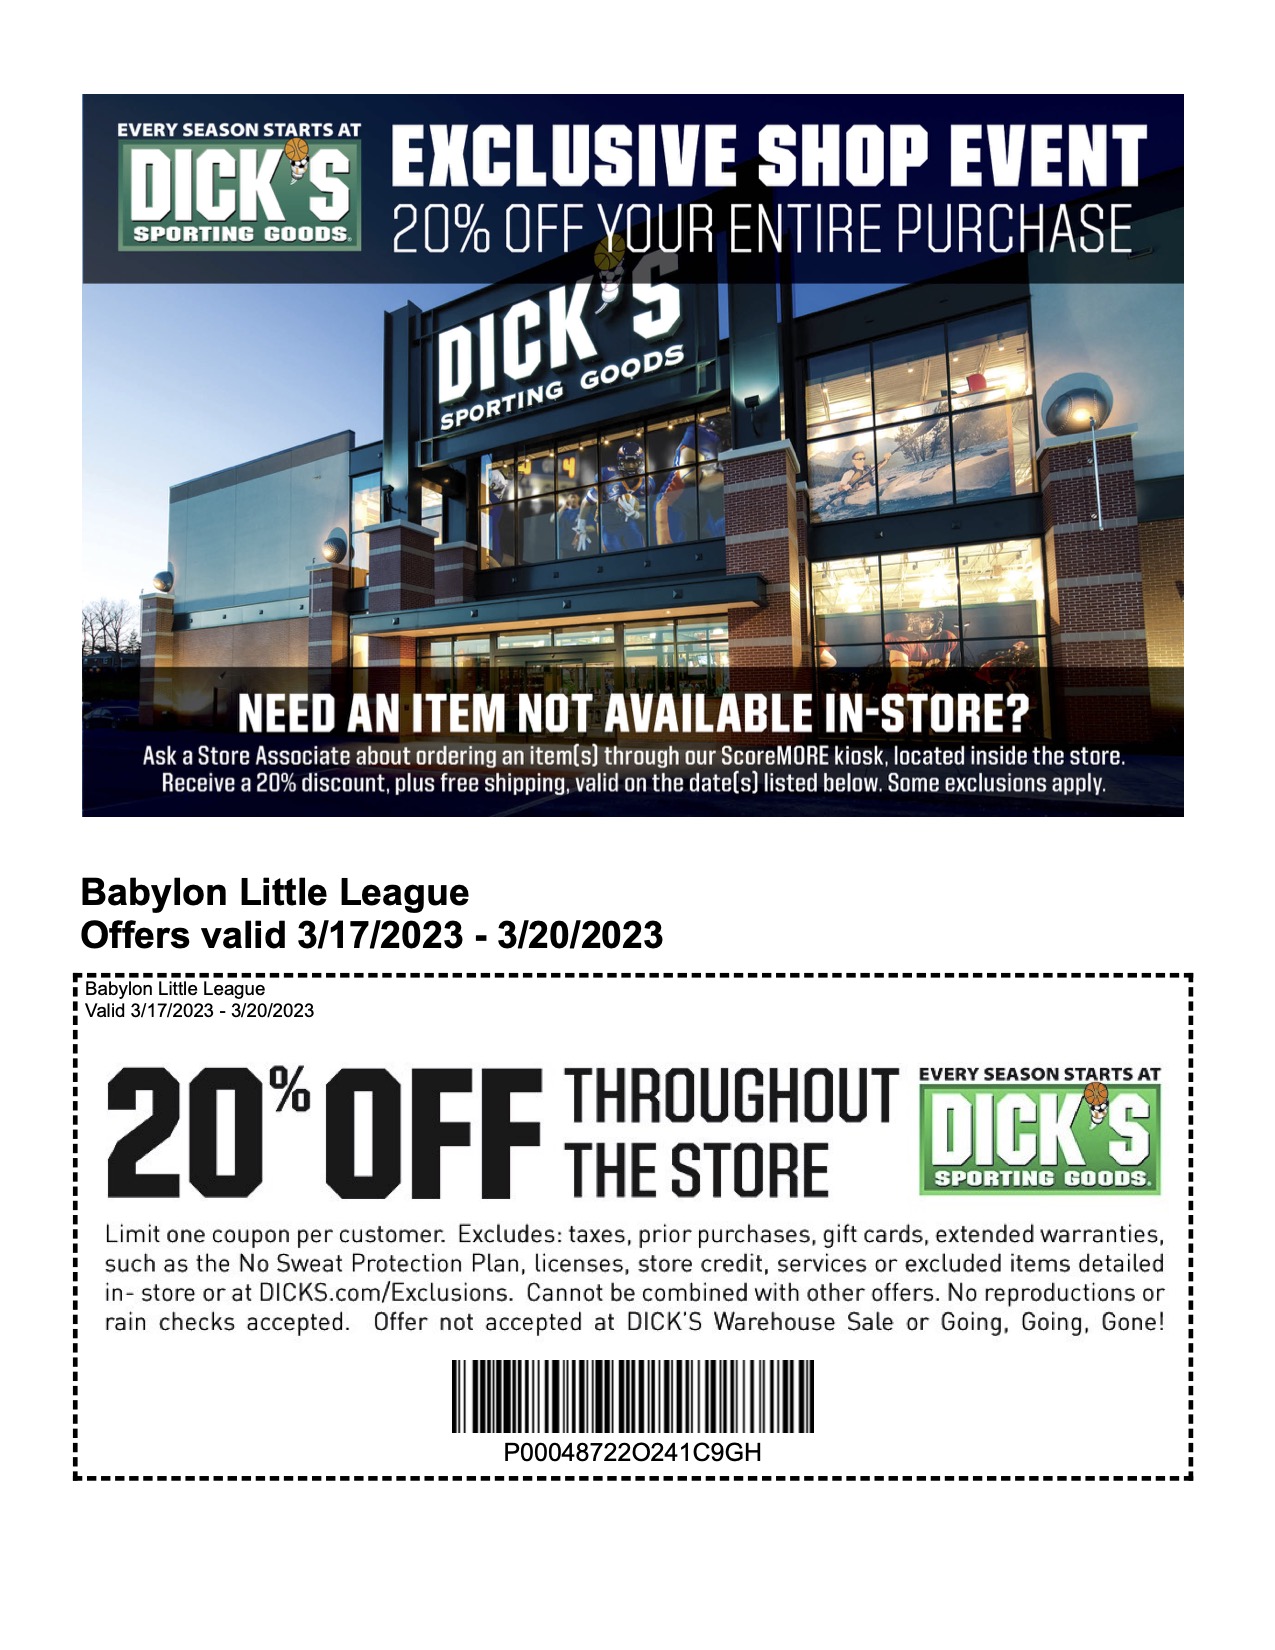 Dick's Sporting Goods Discount Coupon Valid March 1720, 2023